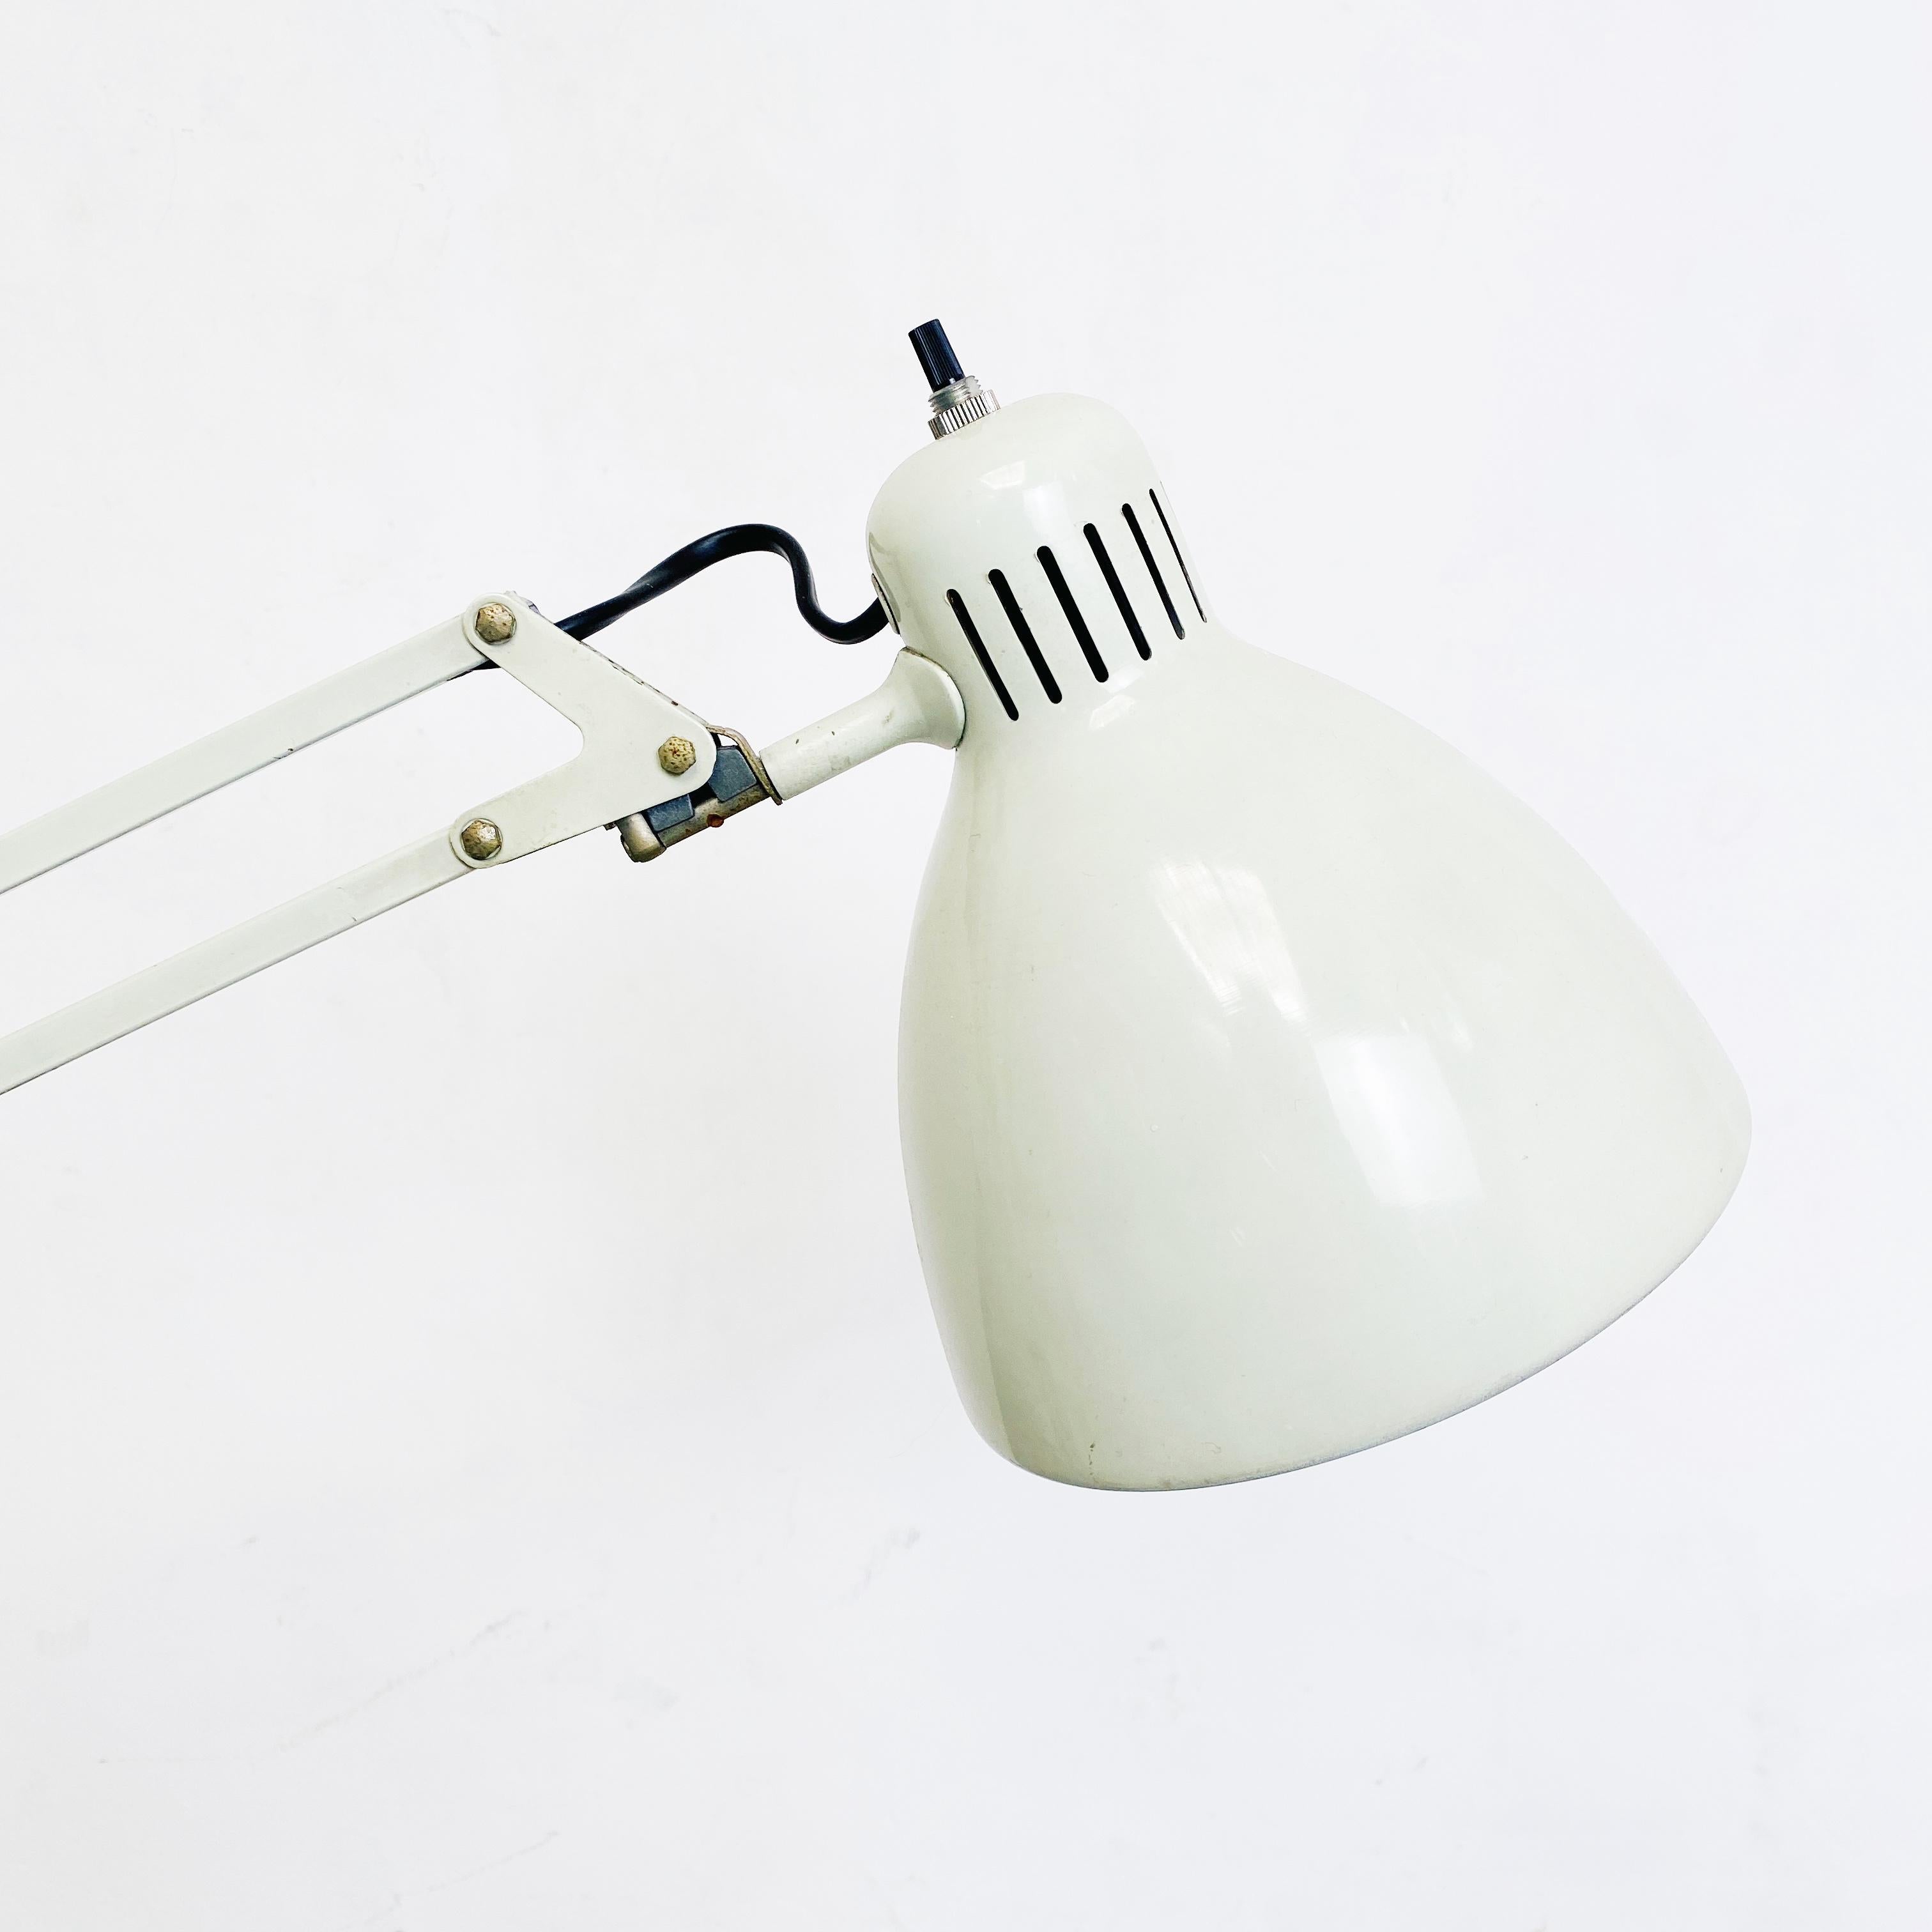 Mid-20th Century Norwegian White Metal Naska Loris Table Lamp by Jac Jacobsen for Luxo, 1950s For Sale